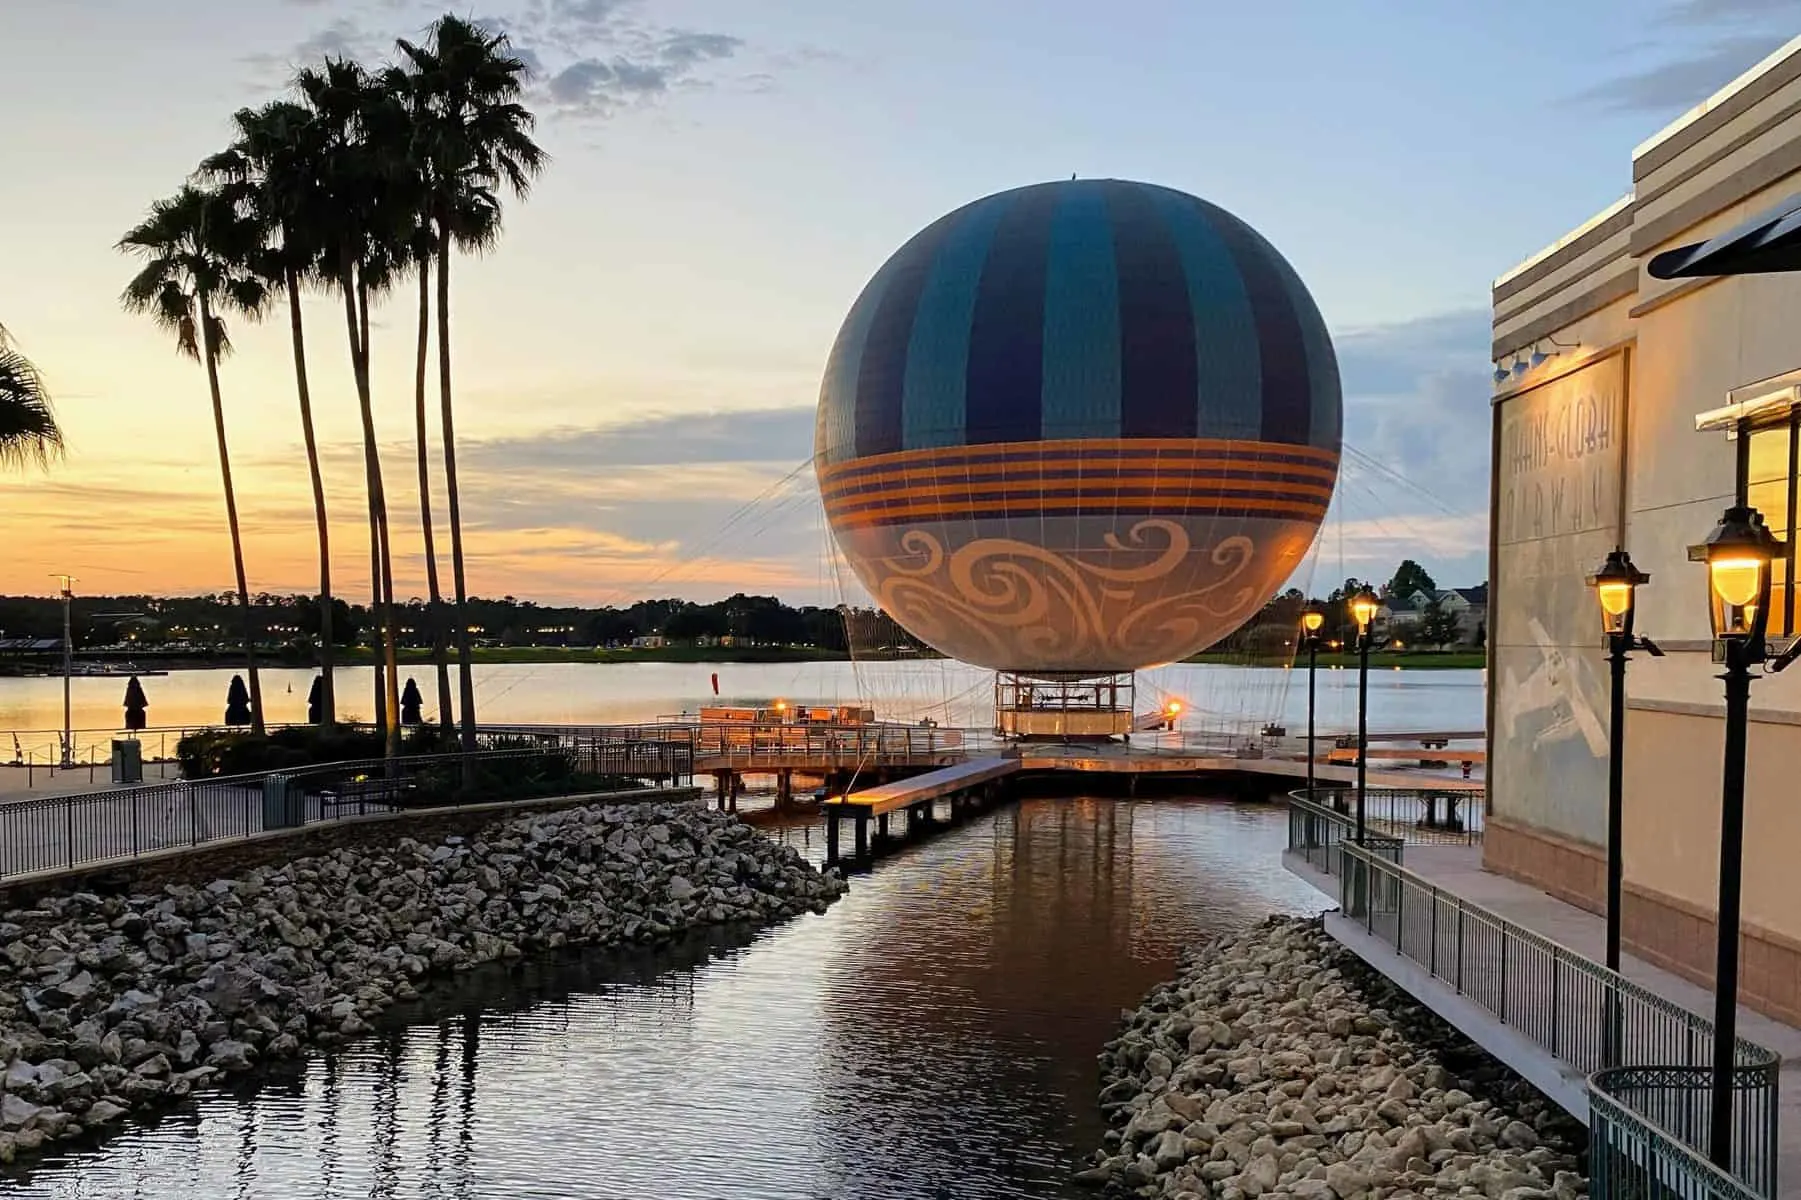 5 fun things to do outside the Walt Disney World parks